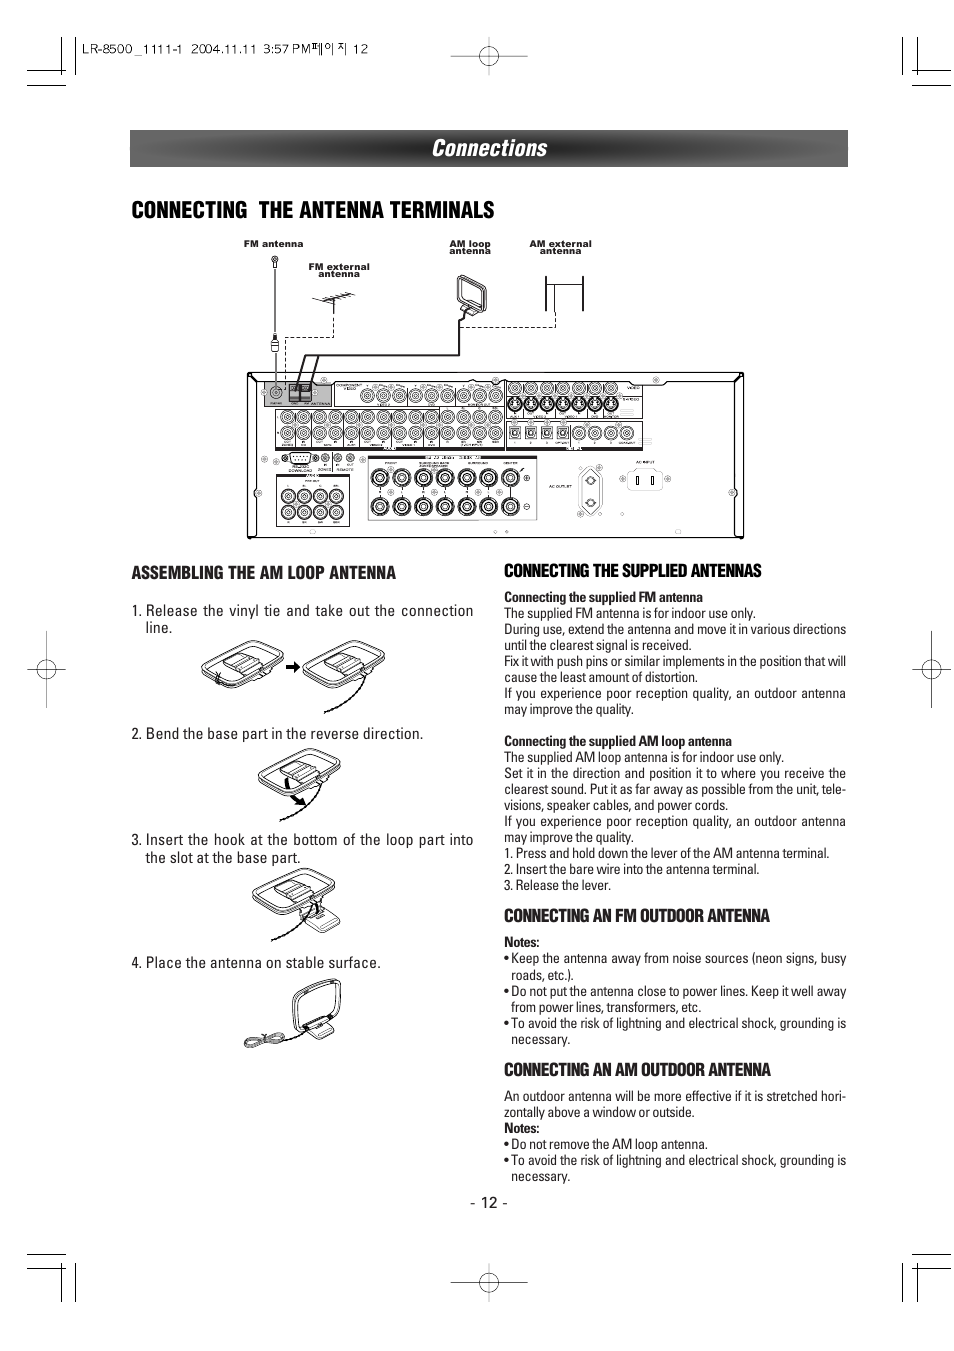 Connecting the antenna terminals, Connections | Luxman LR-8500 User Manual | Page 12 / 41